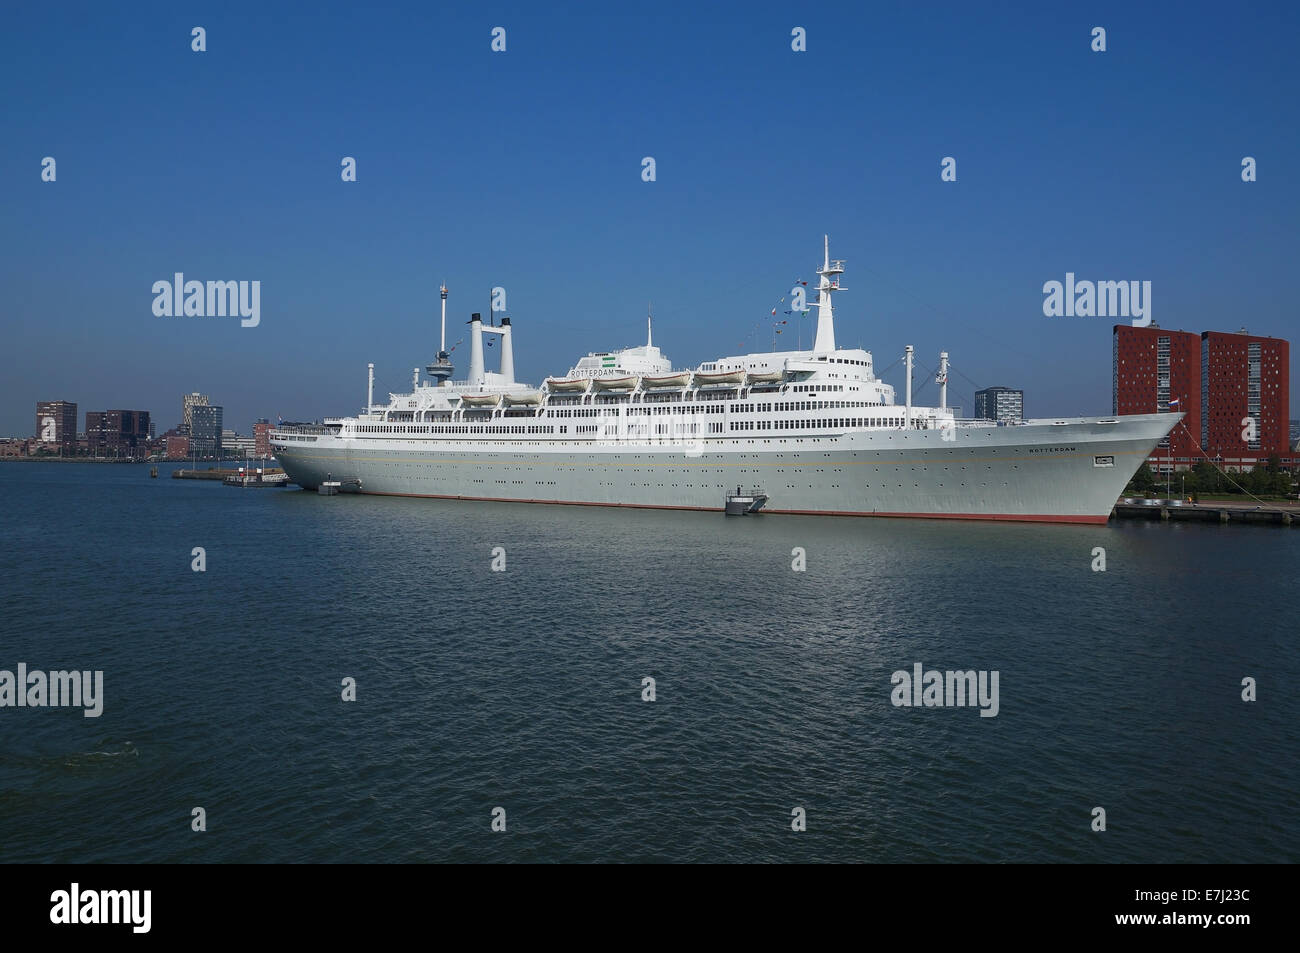 The retired SS Rotterdam now serves as a hotel, museum and tourist attraction. Stock Photo